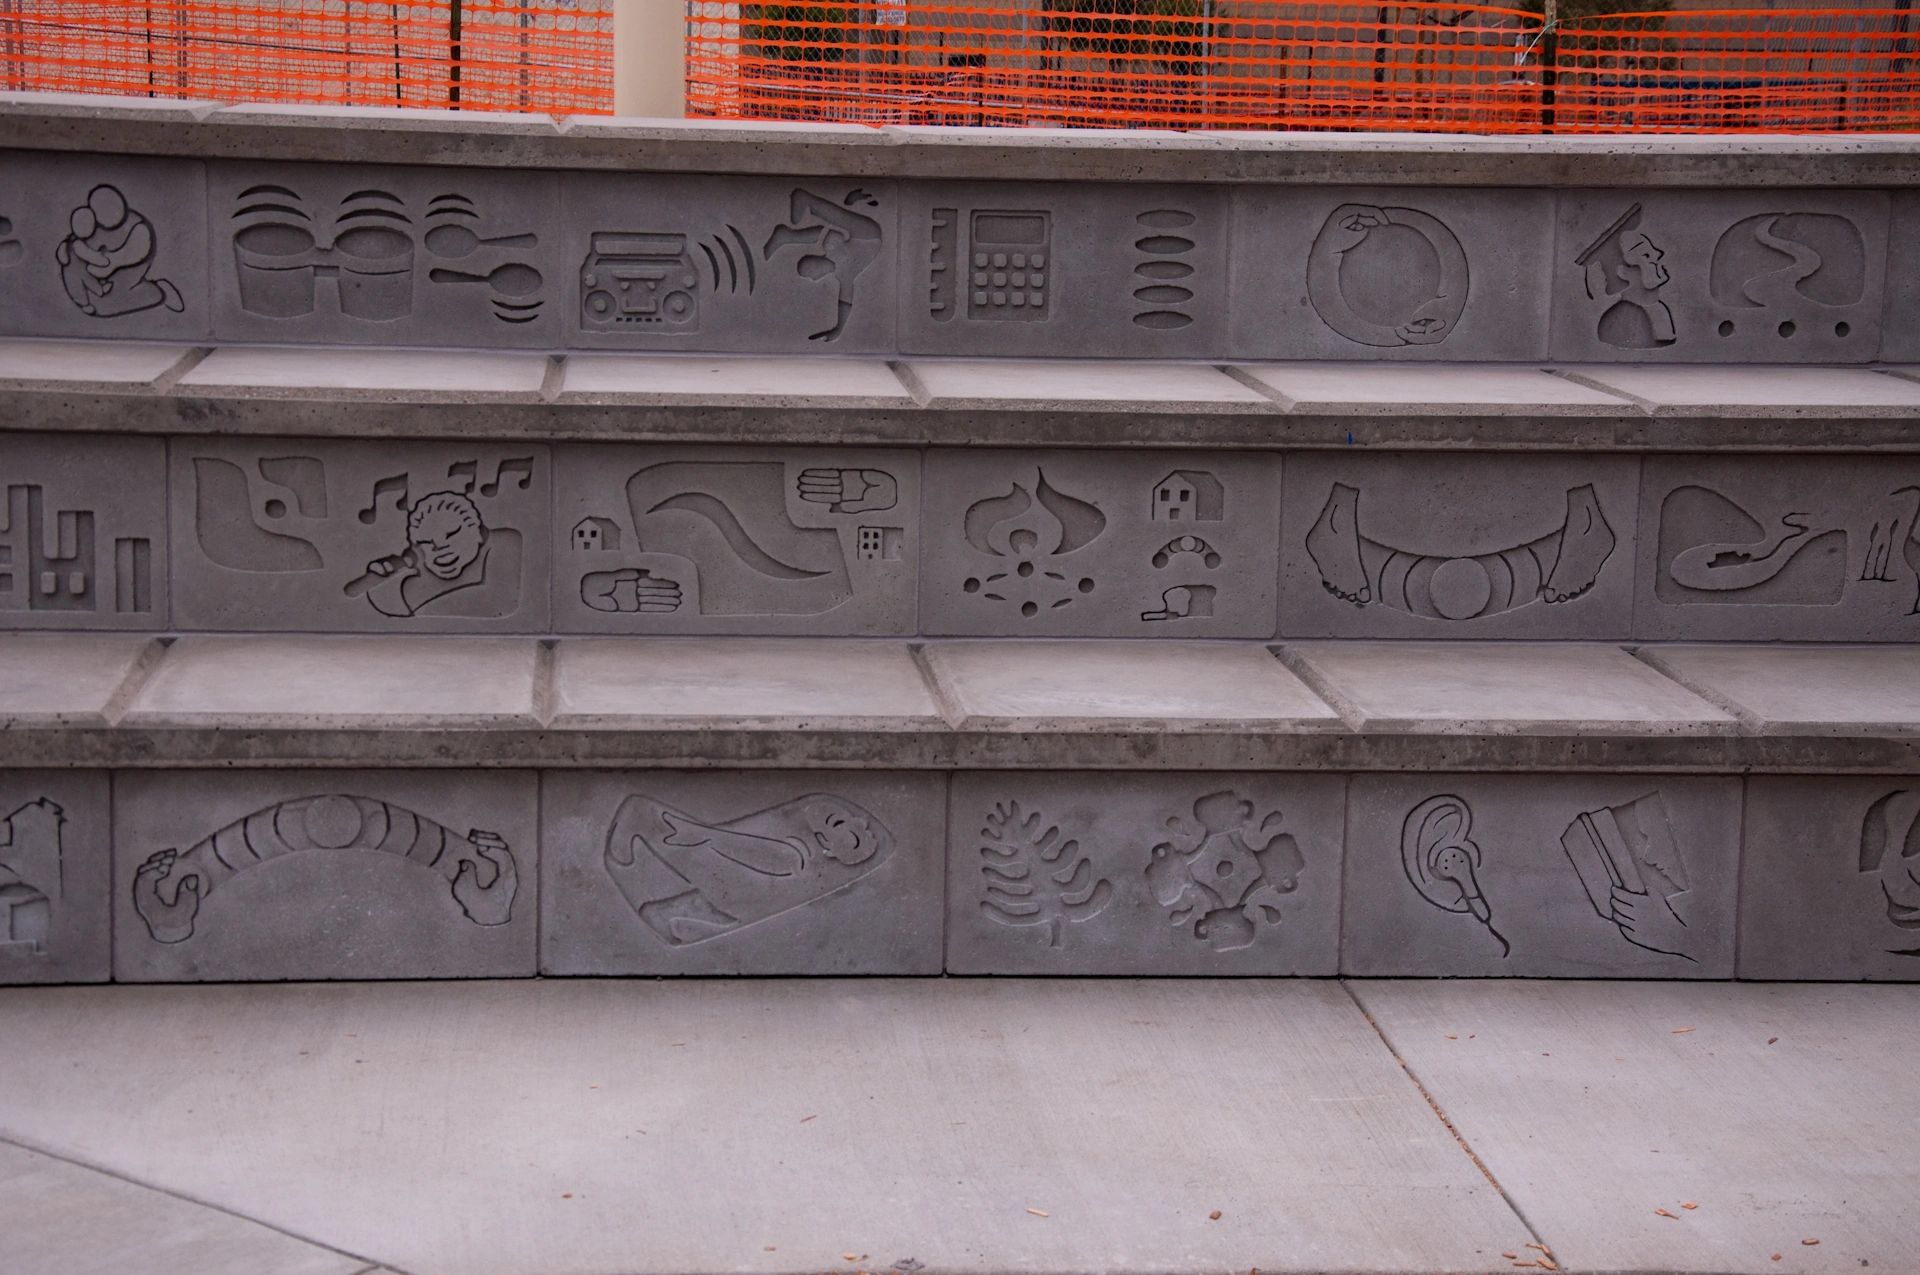 Three rows of decorative concrete bas relief tiles on amphitheater seating viewed up close.